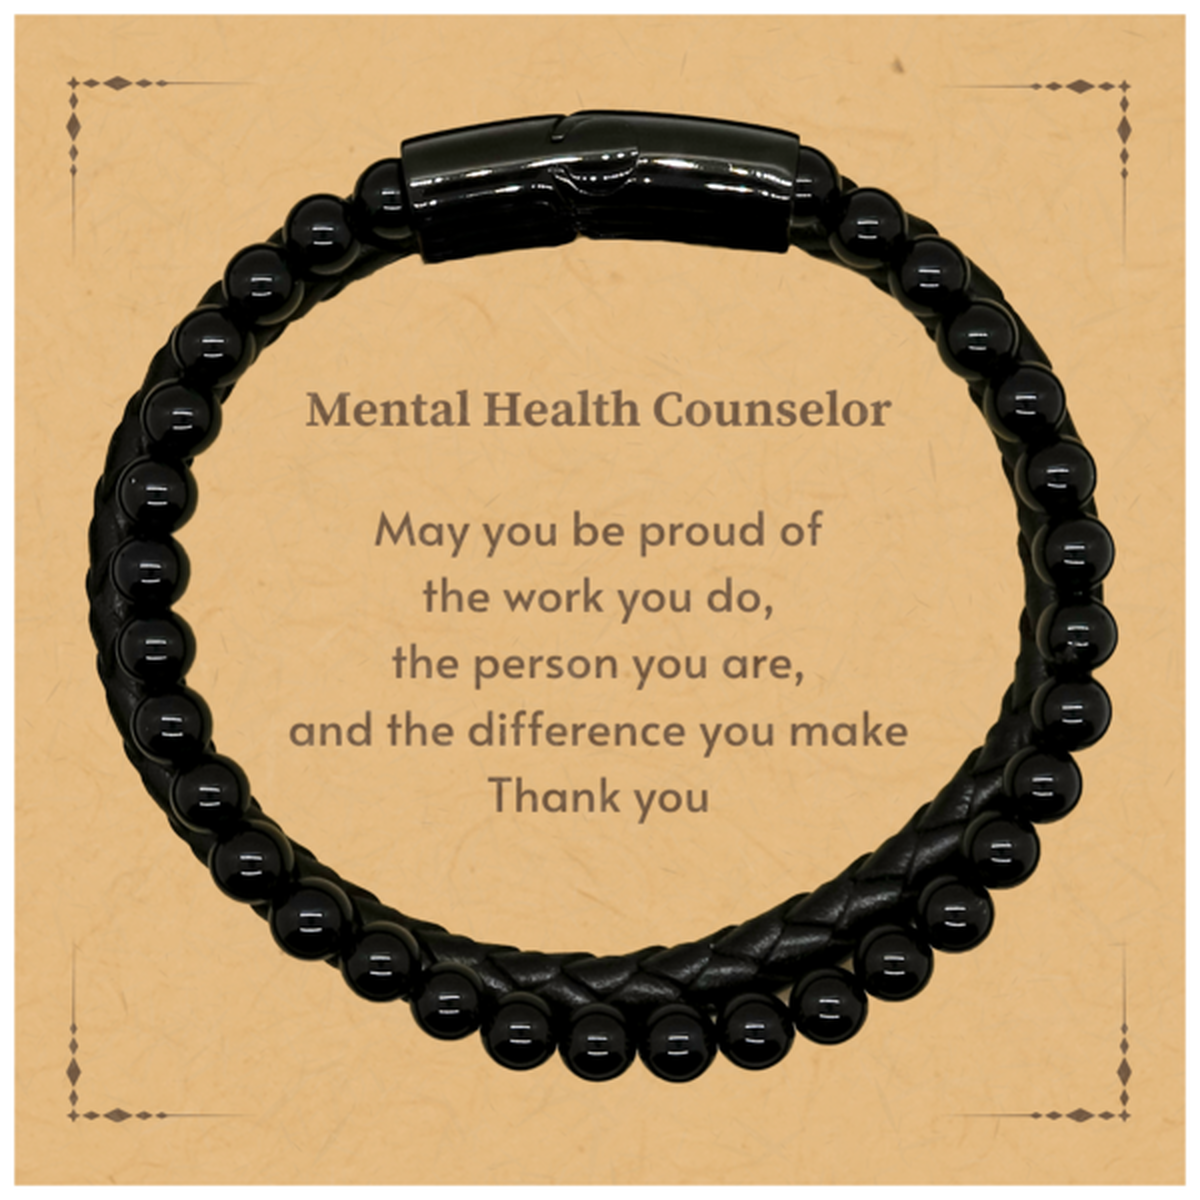 Heartwarming Stone Leather Bracelets Retirement Coworkers Gifts for Mental Health Counselor, Mental Health Counselor May You be proud of the work you do, the person you are Gifts for Boss Men Women Friends